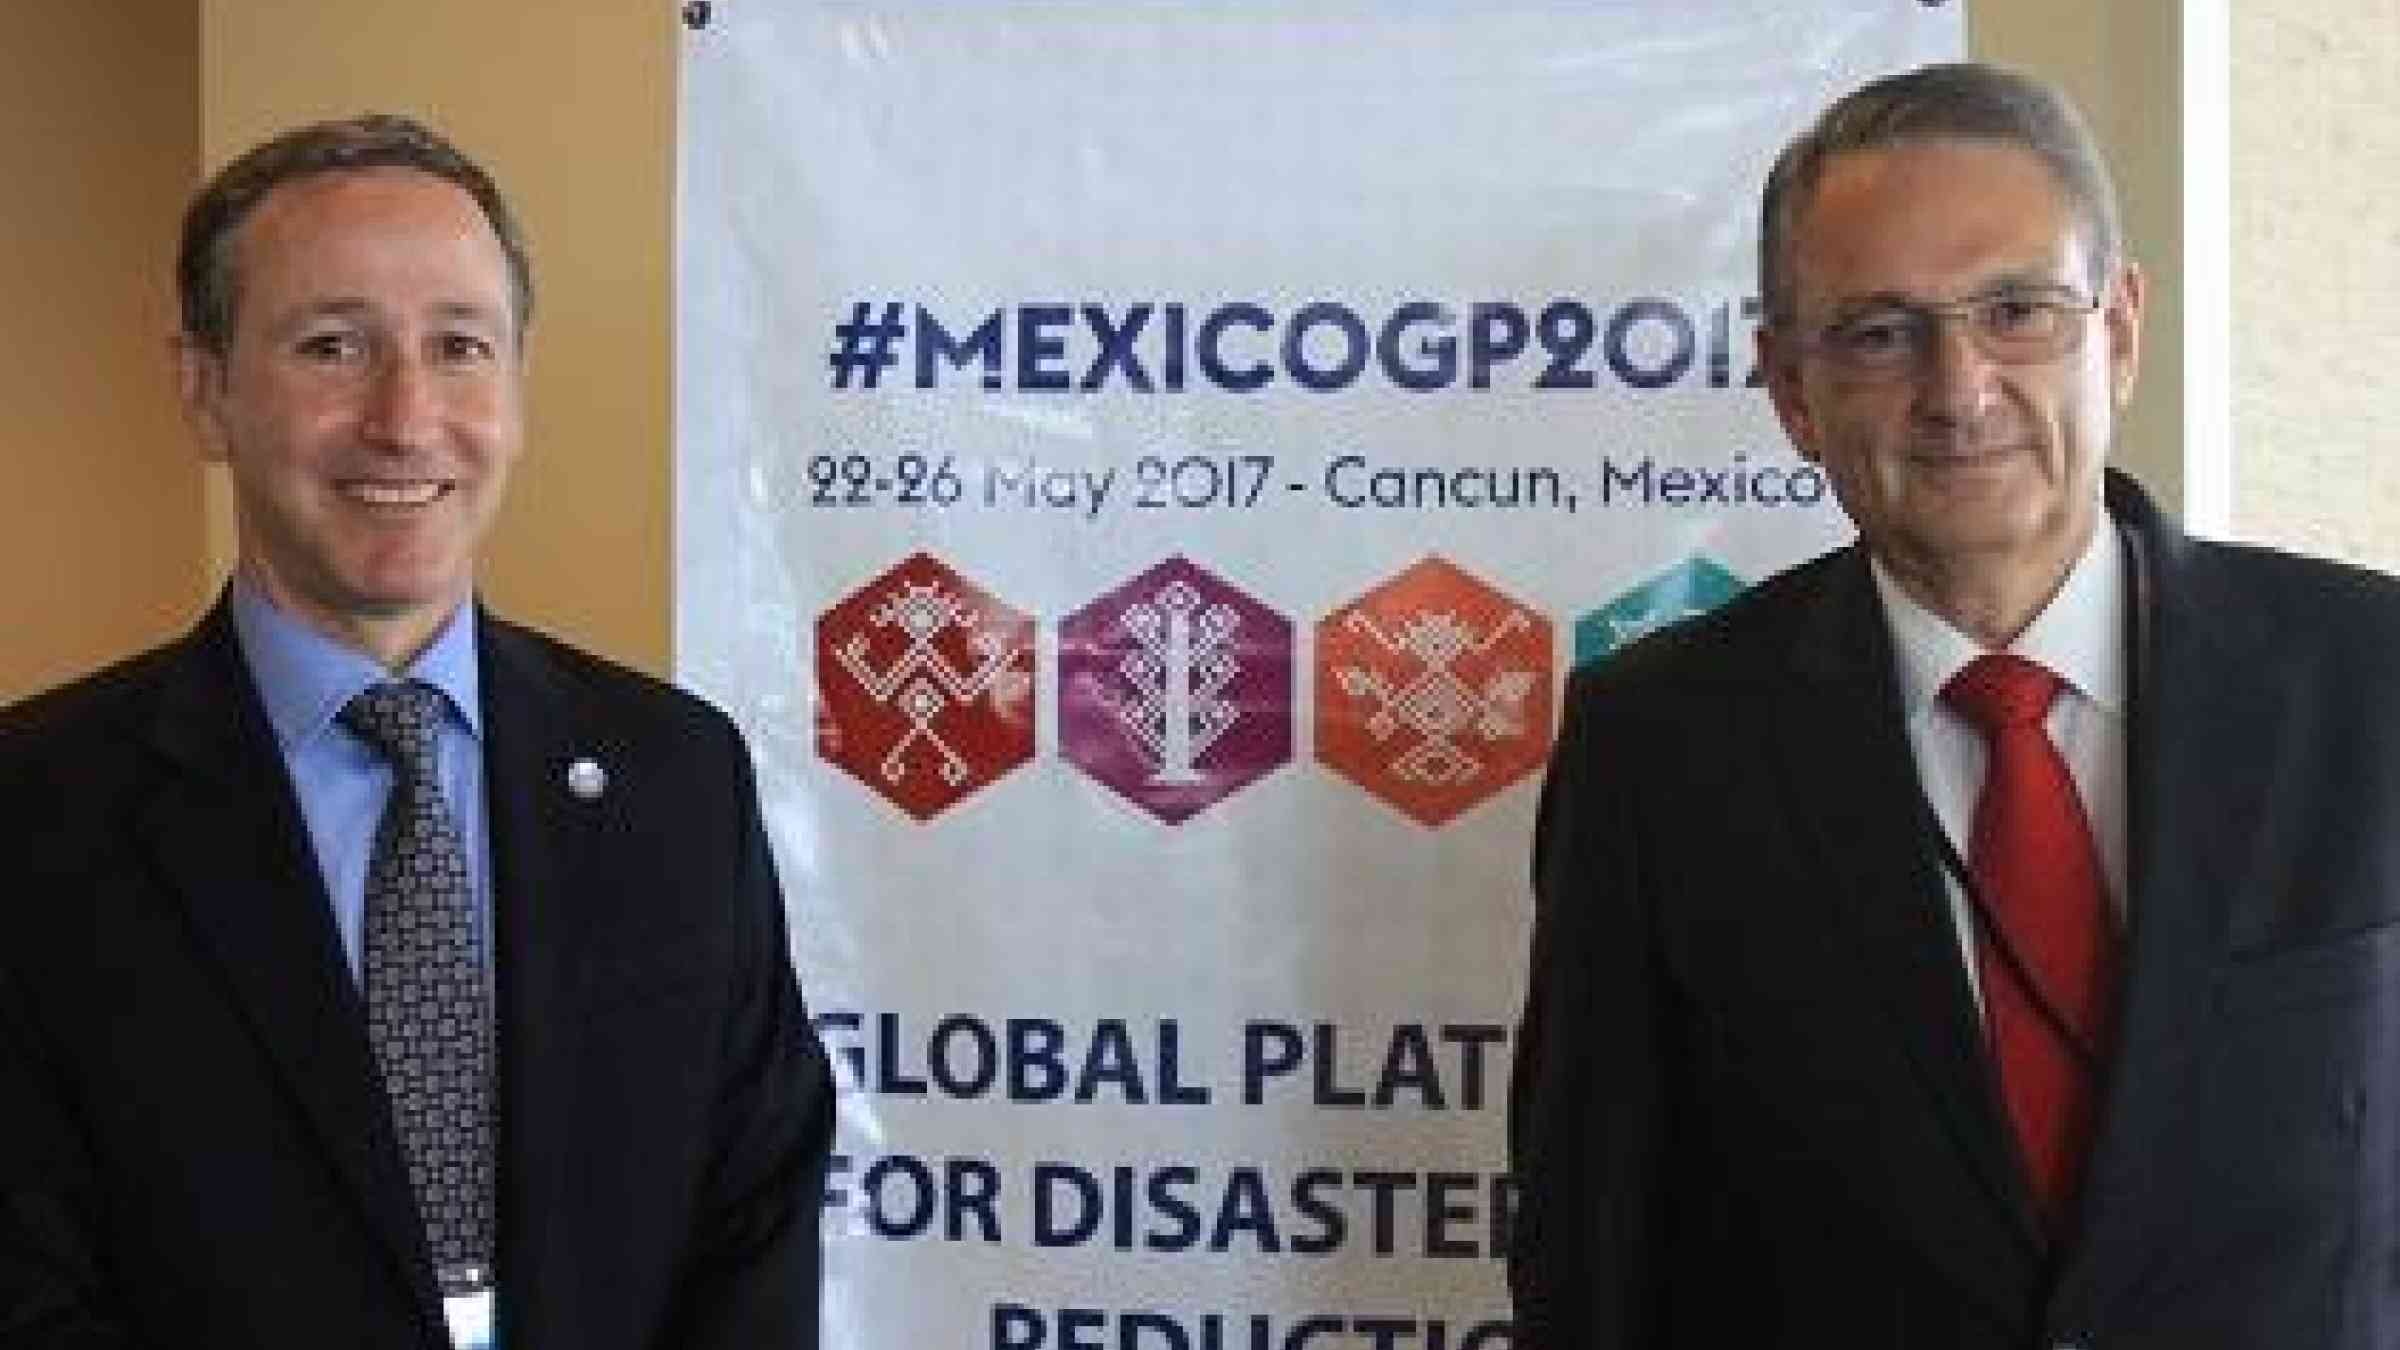 Mr. Robert Glasser, UN Special Representative of the Secretary-General for Disaster Risk Reduction (left) with Mr. Luis Felipe Puente Espinosa, Mexico's National Coordinator of Civil Protection, after the briefing on the Global Platform for Disaster Risk Reduction (Photo: UNISDR)